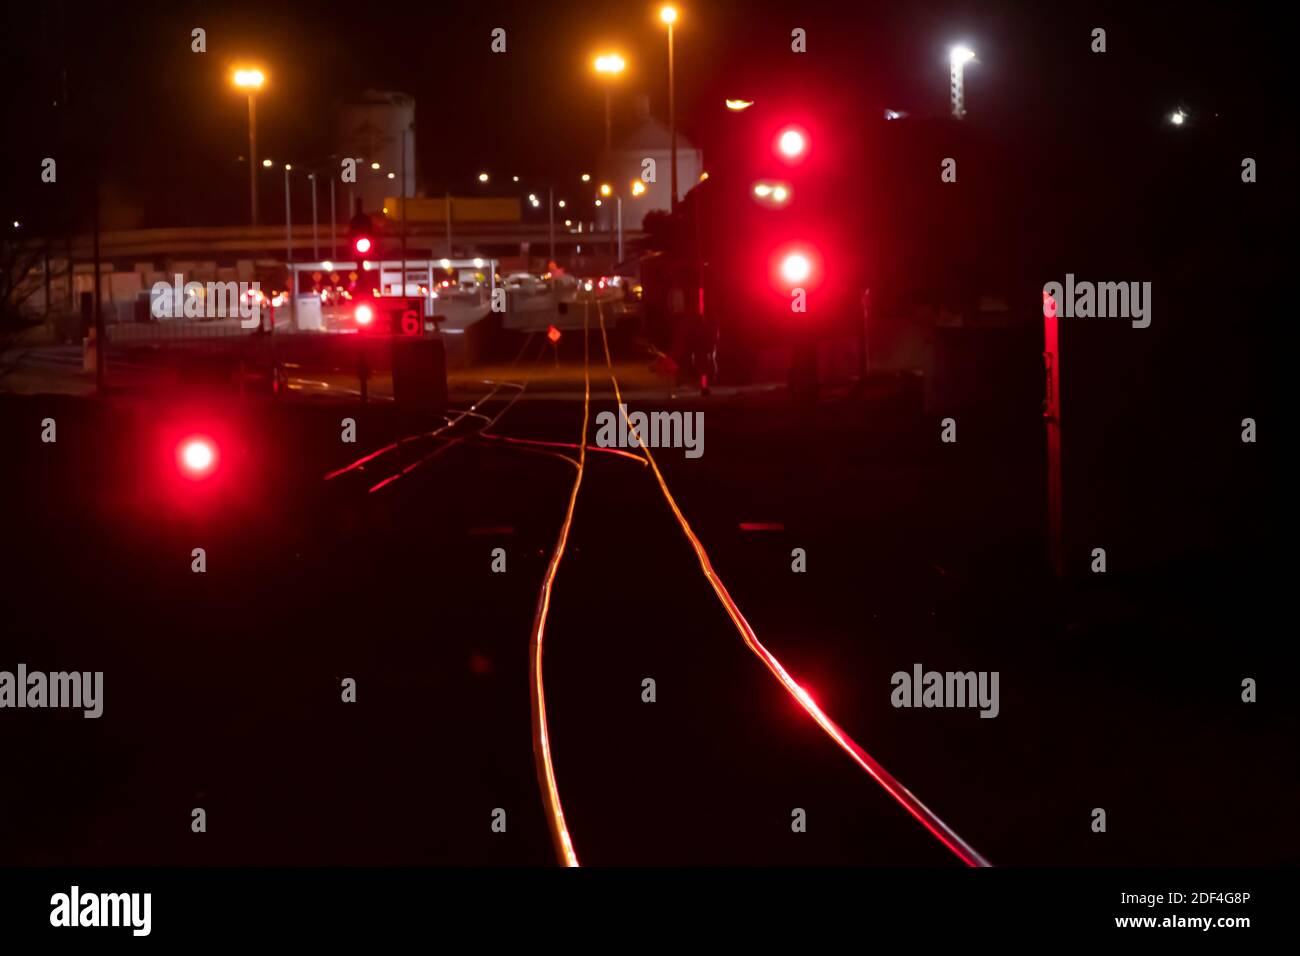 Railway line and red signals, Picton, Marlborough, South Island, New Zealand Stock Photo